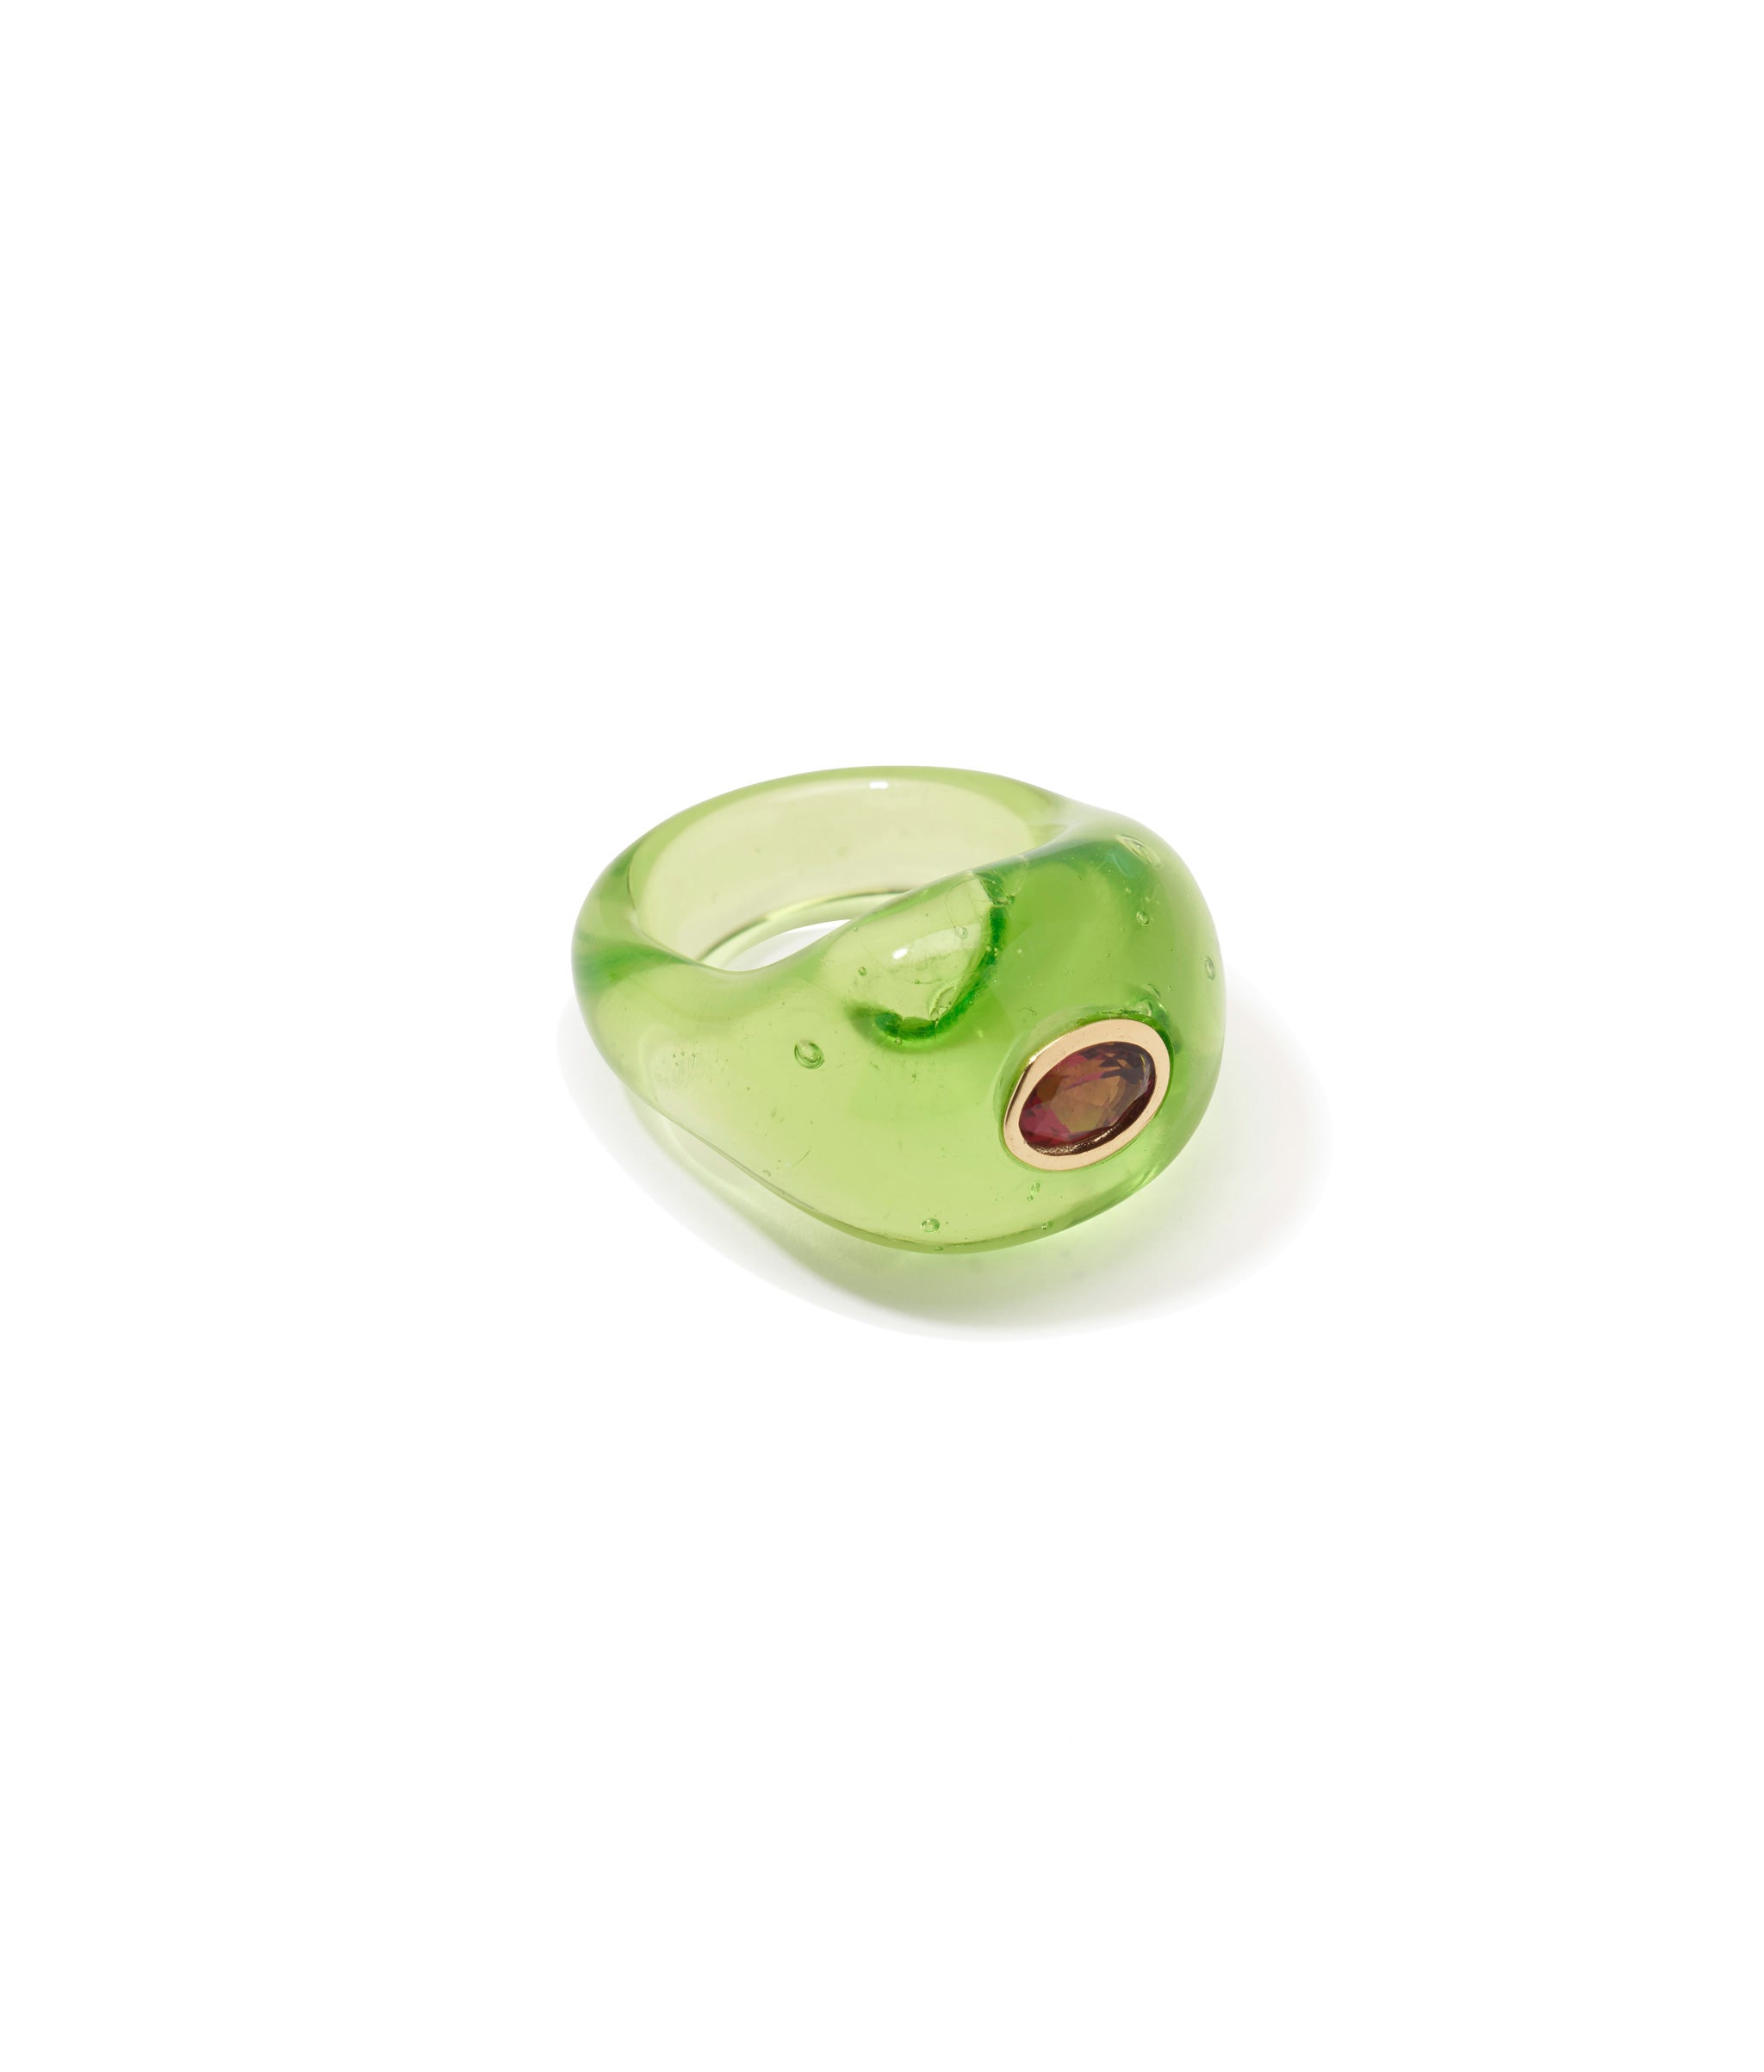 Monument Ring in Lime. Flameworked green glass set with a rhodolite cabochon.